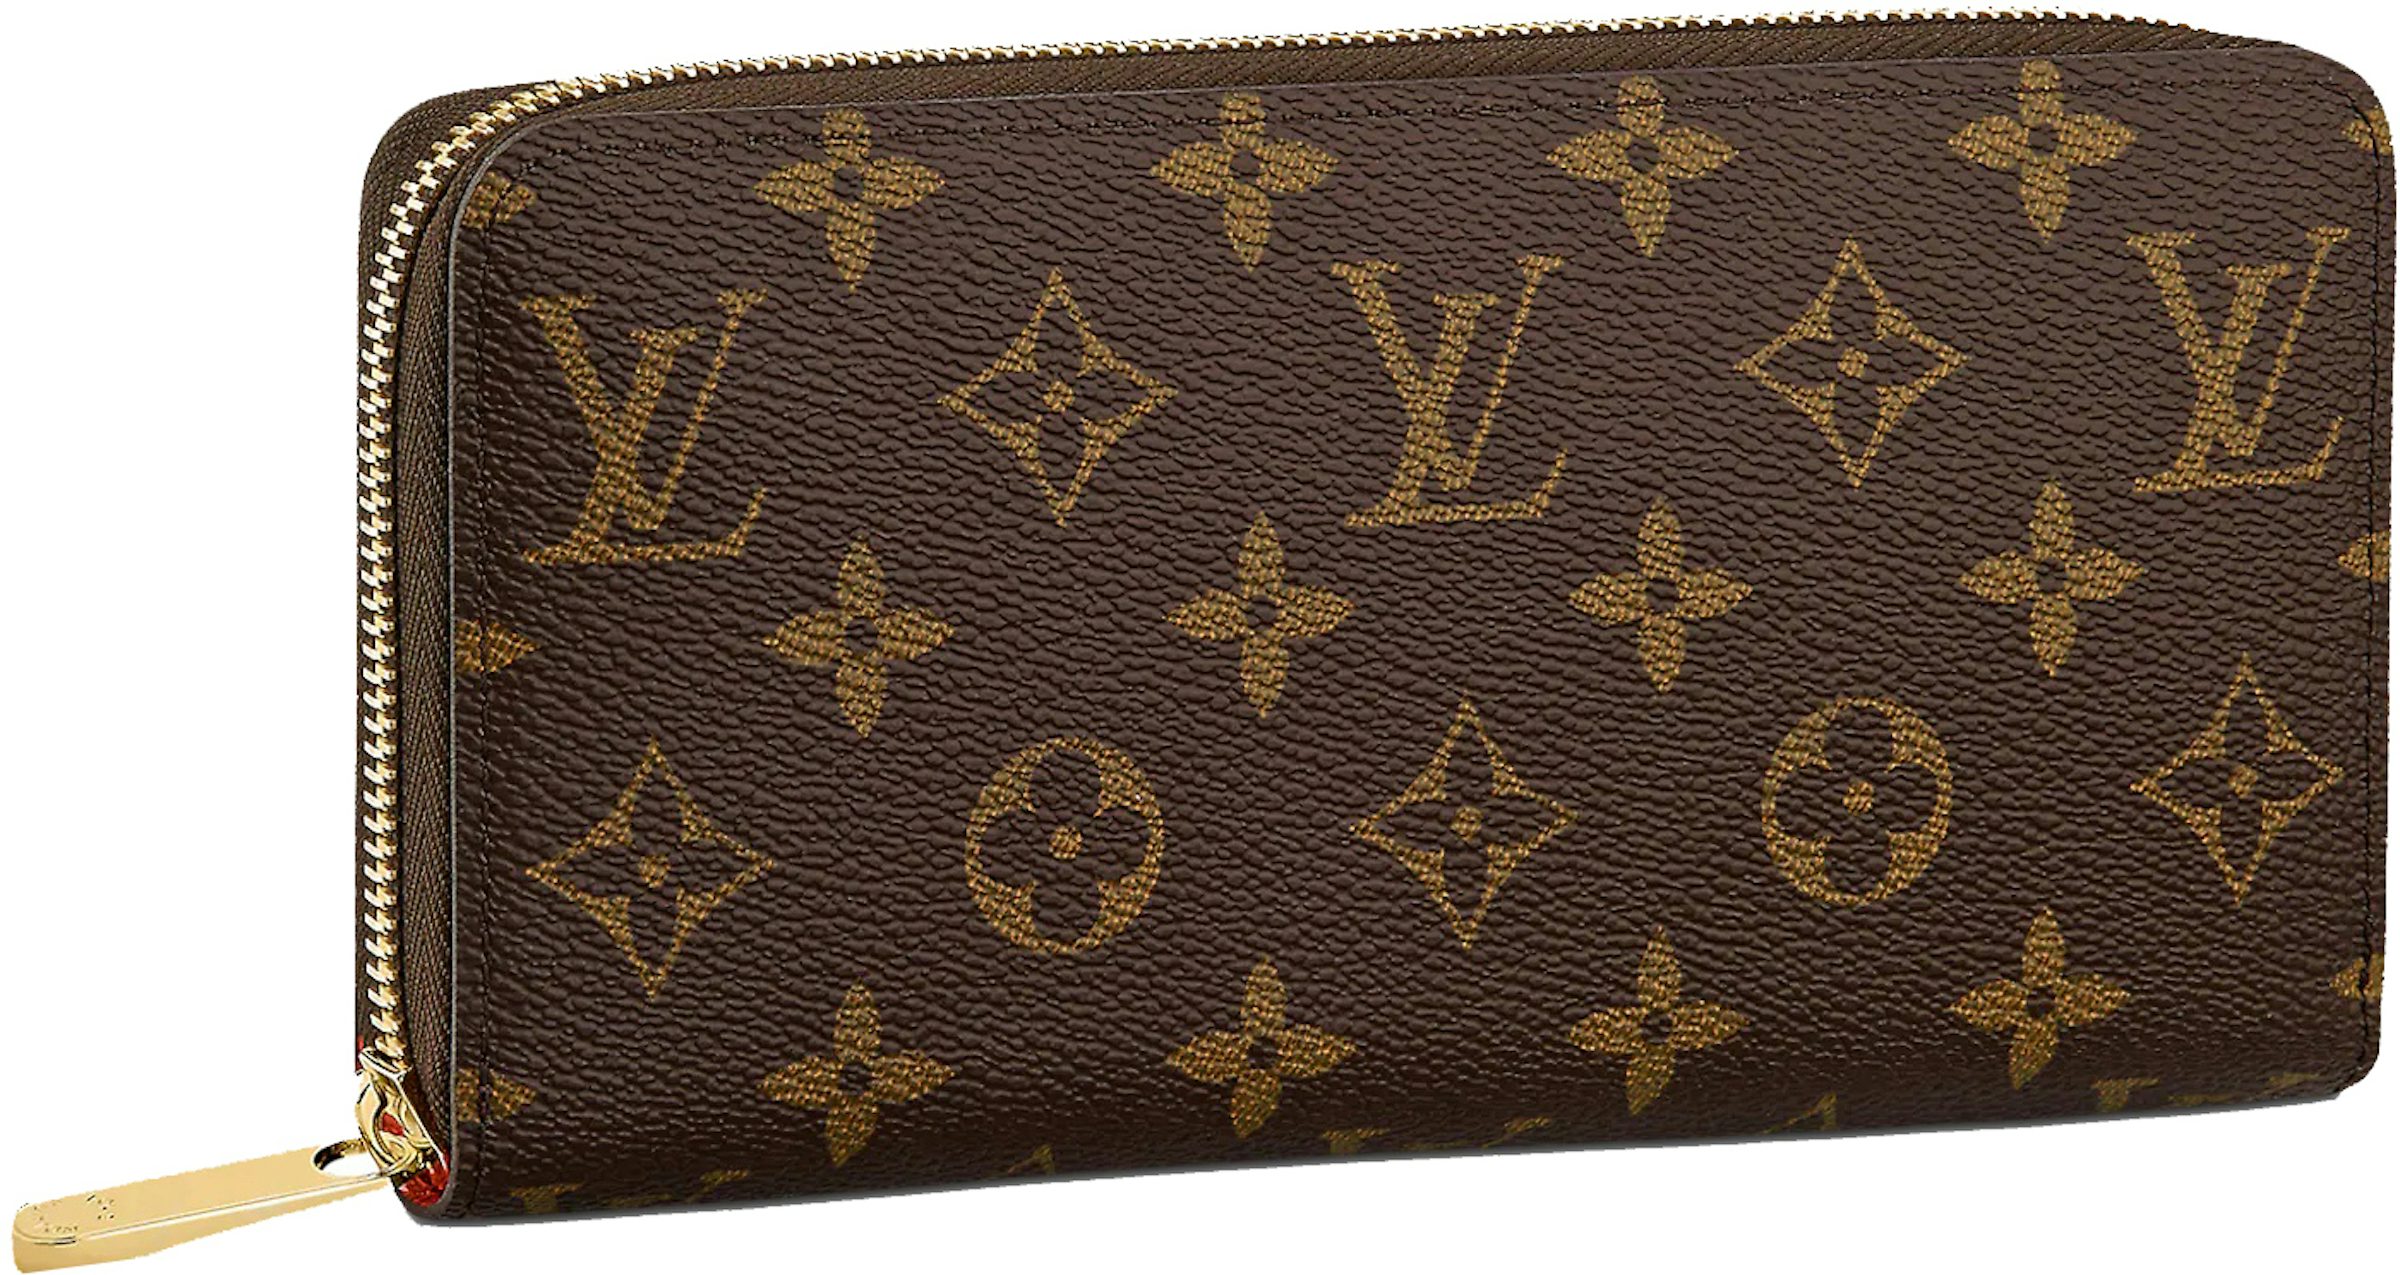 Louis Vuitton Zippy Wallet Monogram Poppy in Coated Canvas/Leather